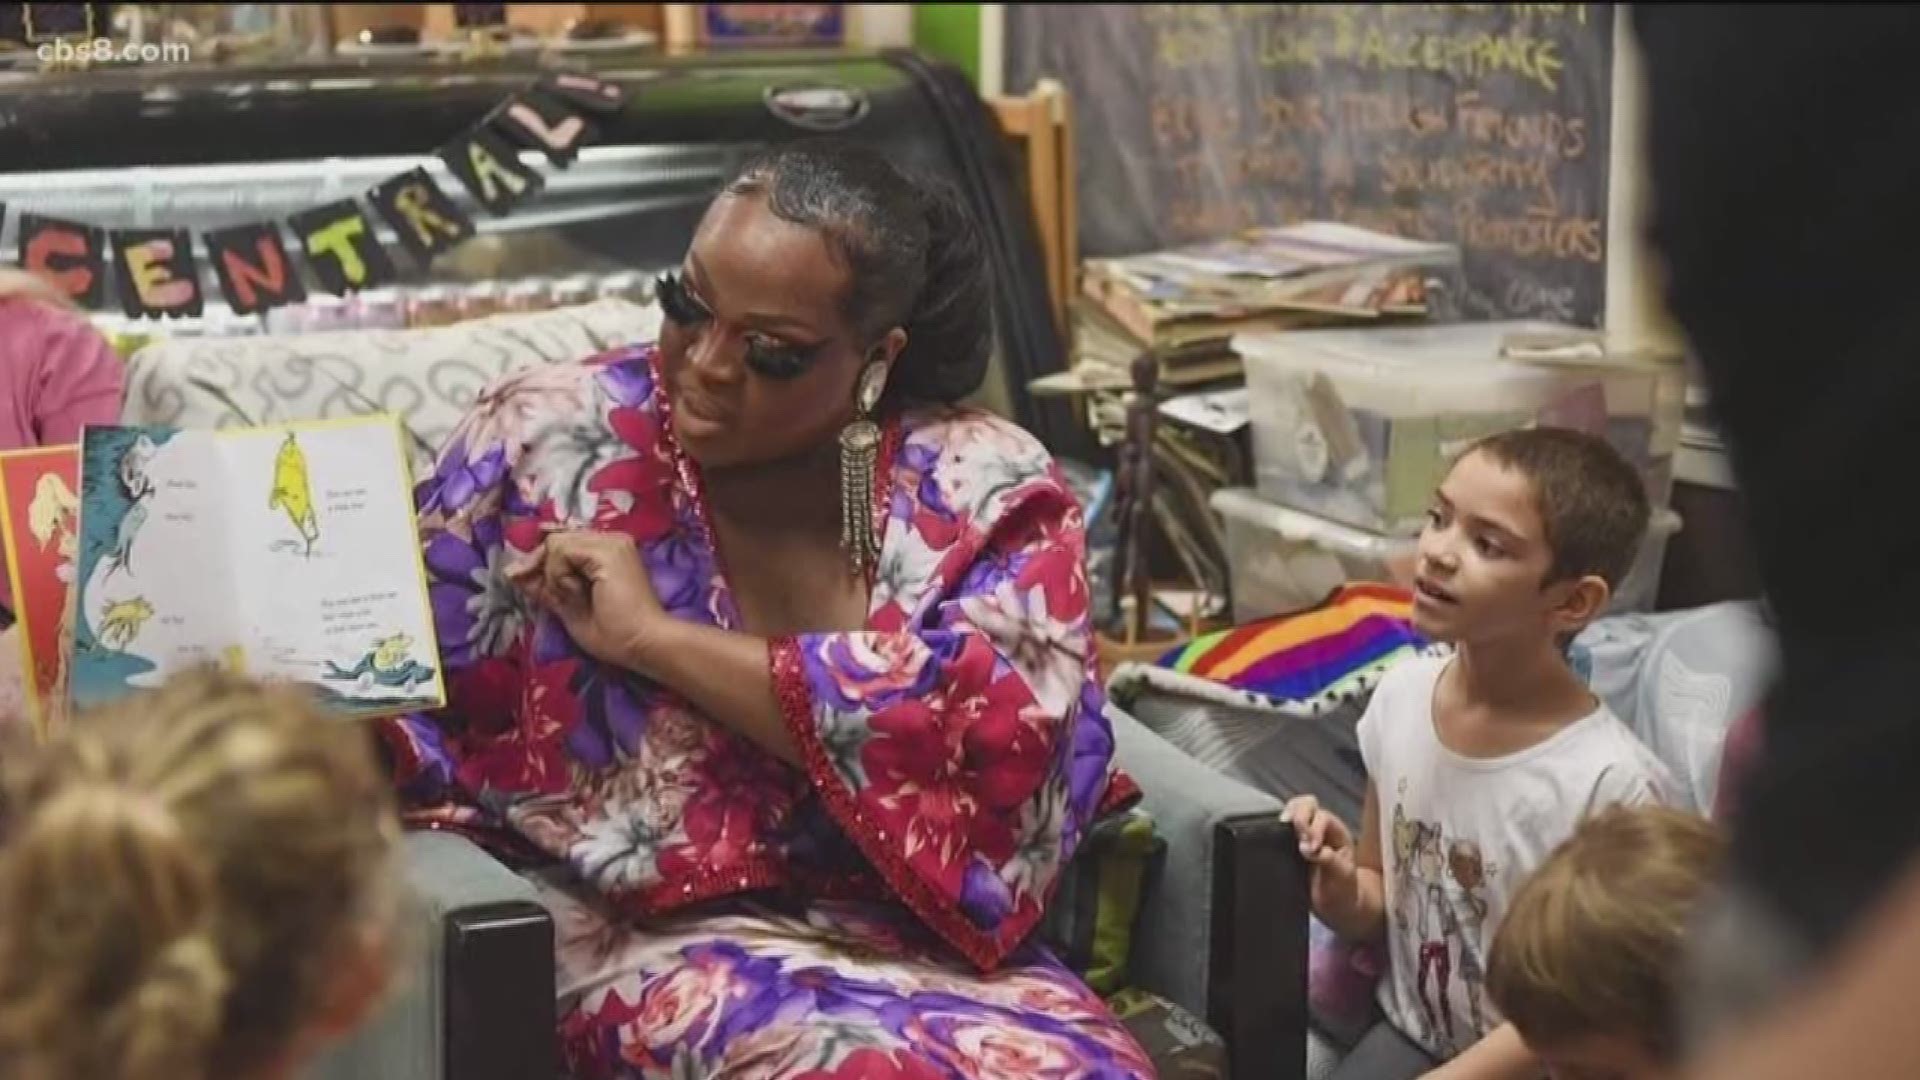 More than 300 families have RSVP to Tuesday's Drag Queen Story Hour, but for some religious leaders in the community it is a different story.